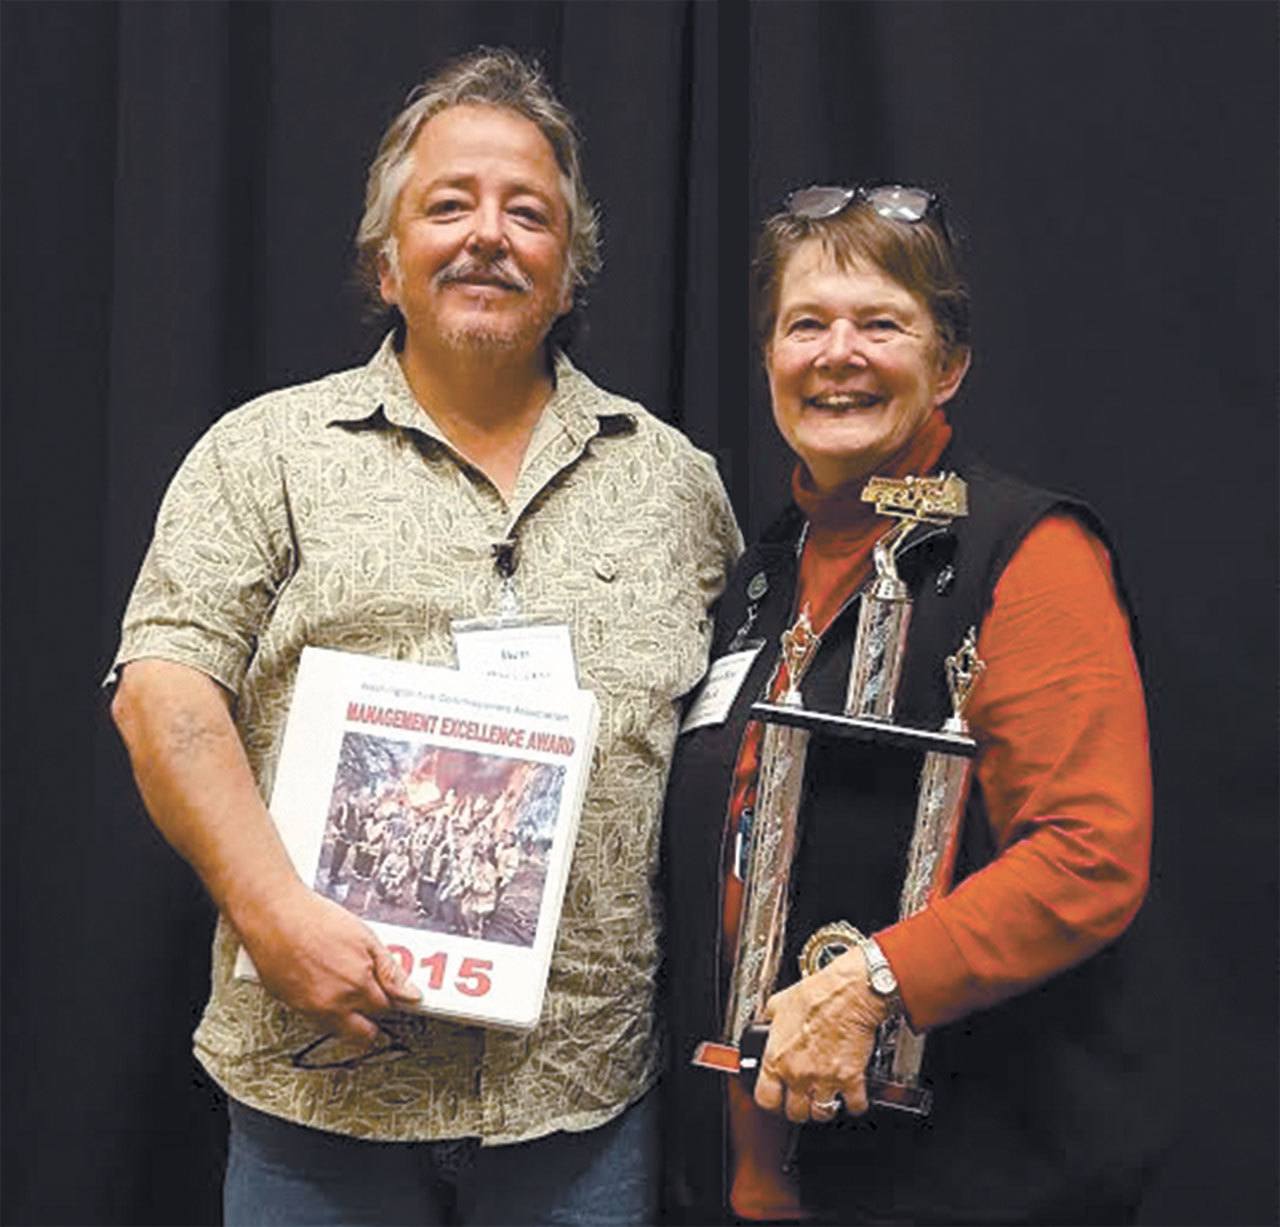 Clallam County Fire District Commissioners Ben Pacheco, left, and Donna Buck accept the first-place trophy for the Washington Fire Commissioners Association’s Management Excellence Award. (Clallam County Fire District No. 4)